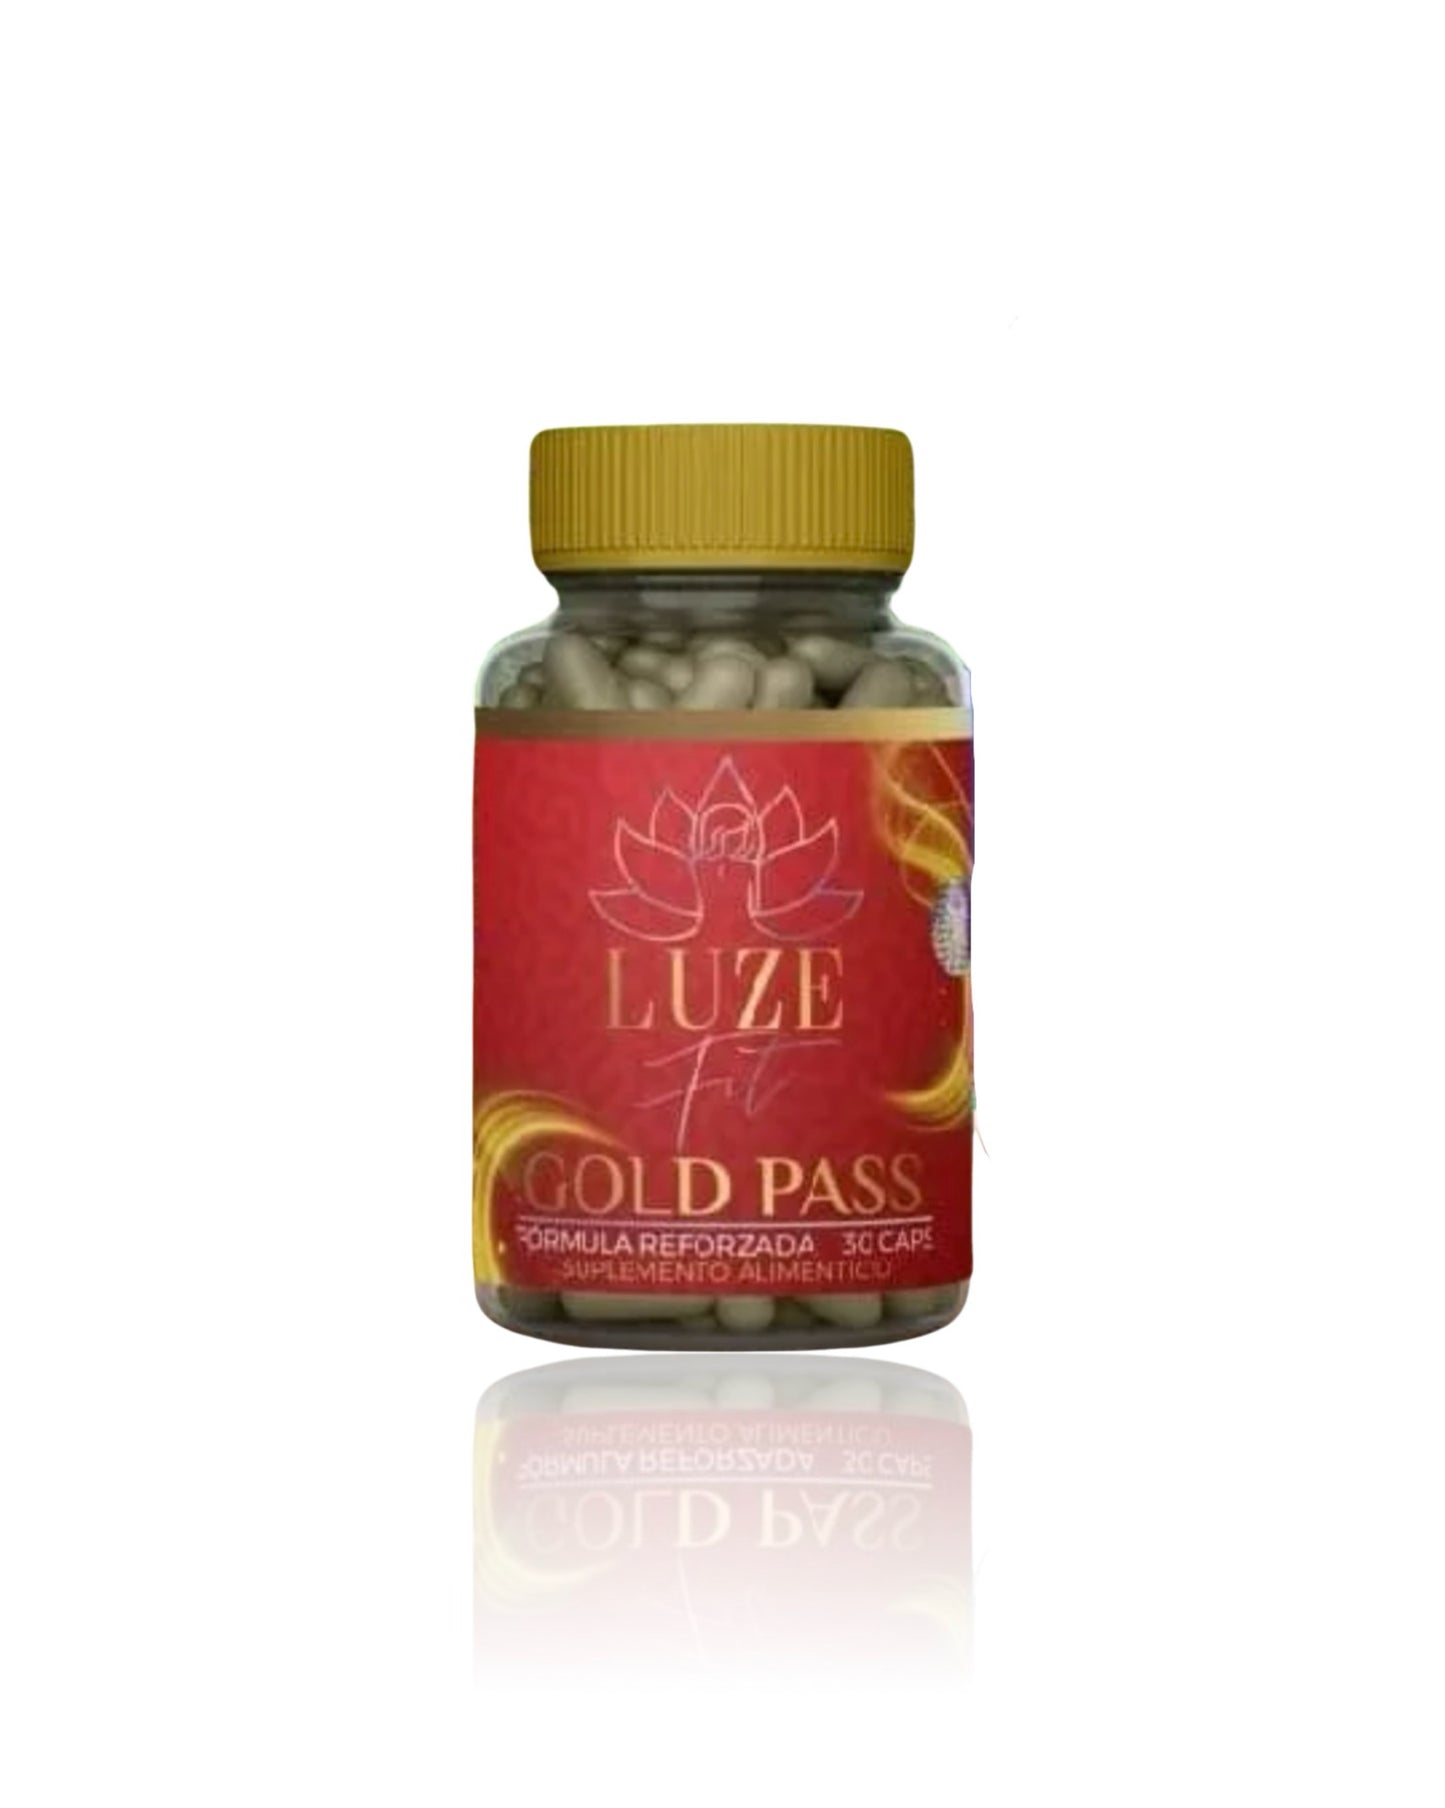 Luze fit gold pass